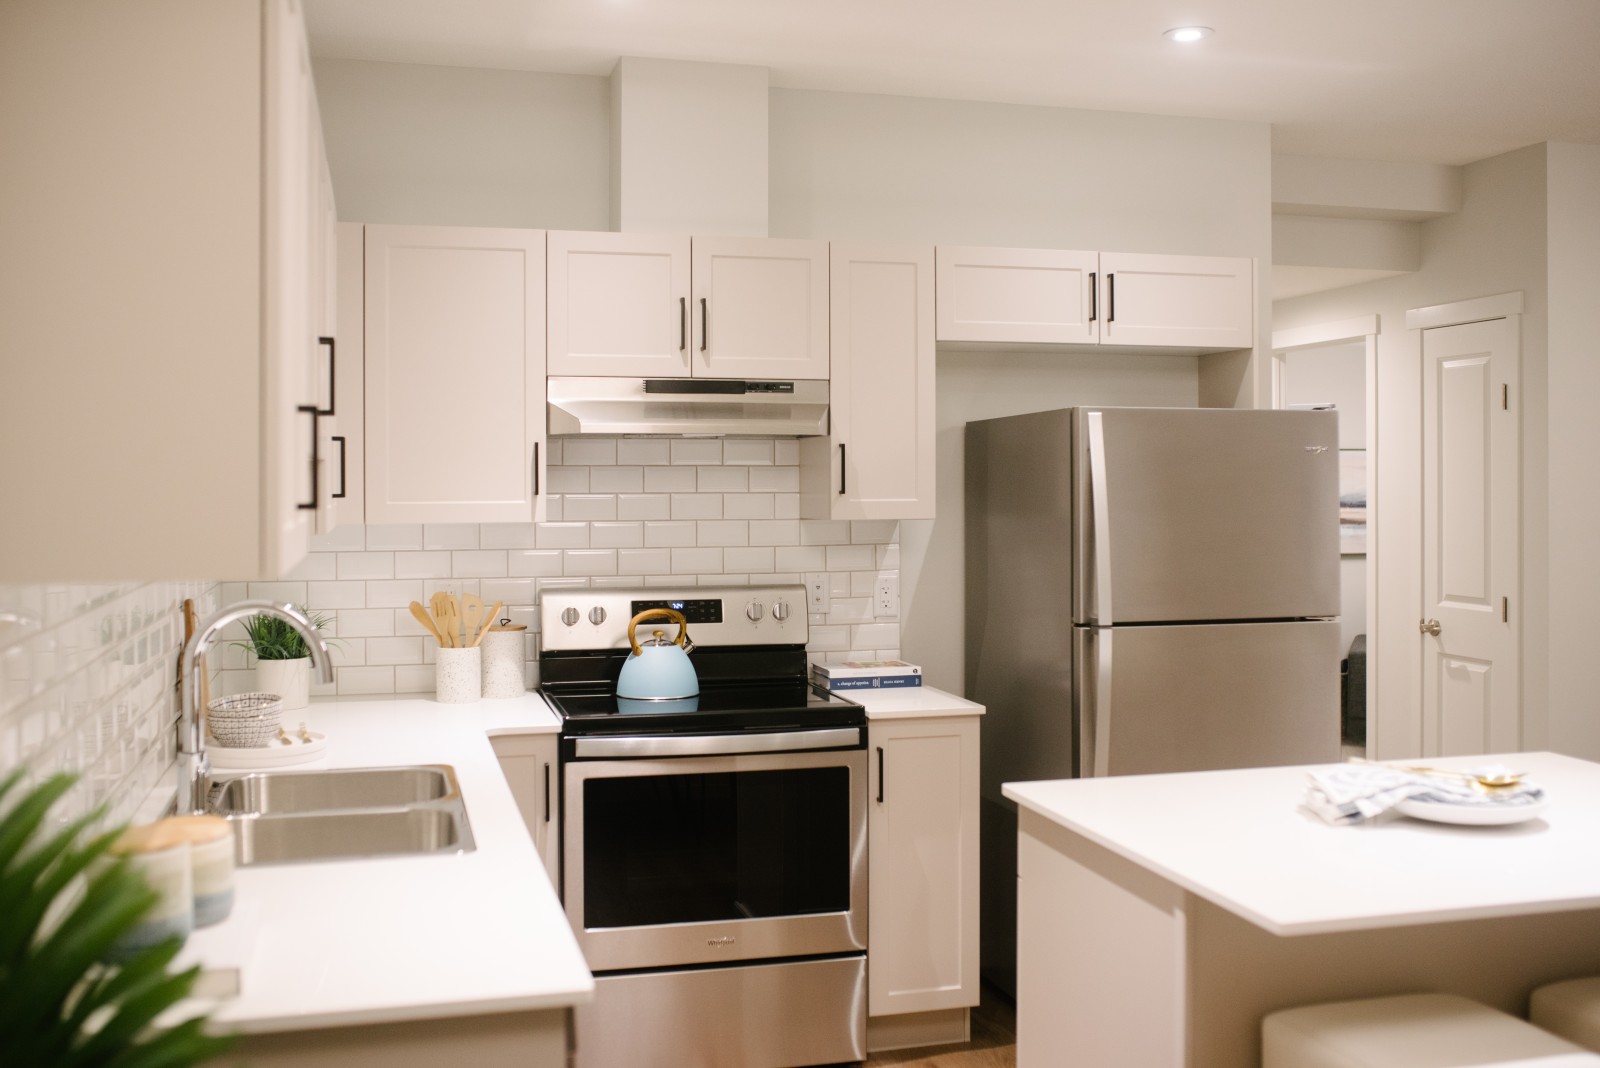 Bright white and inviting kitchen with stainless steel appliances in the Revenue Suite of the Cassius showhome